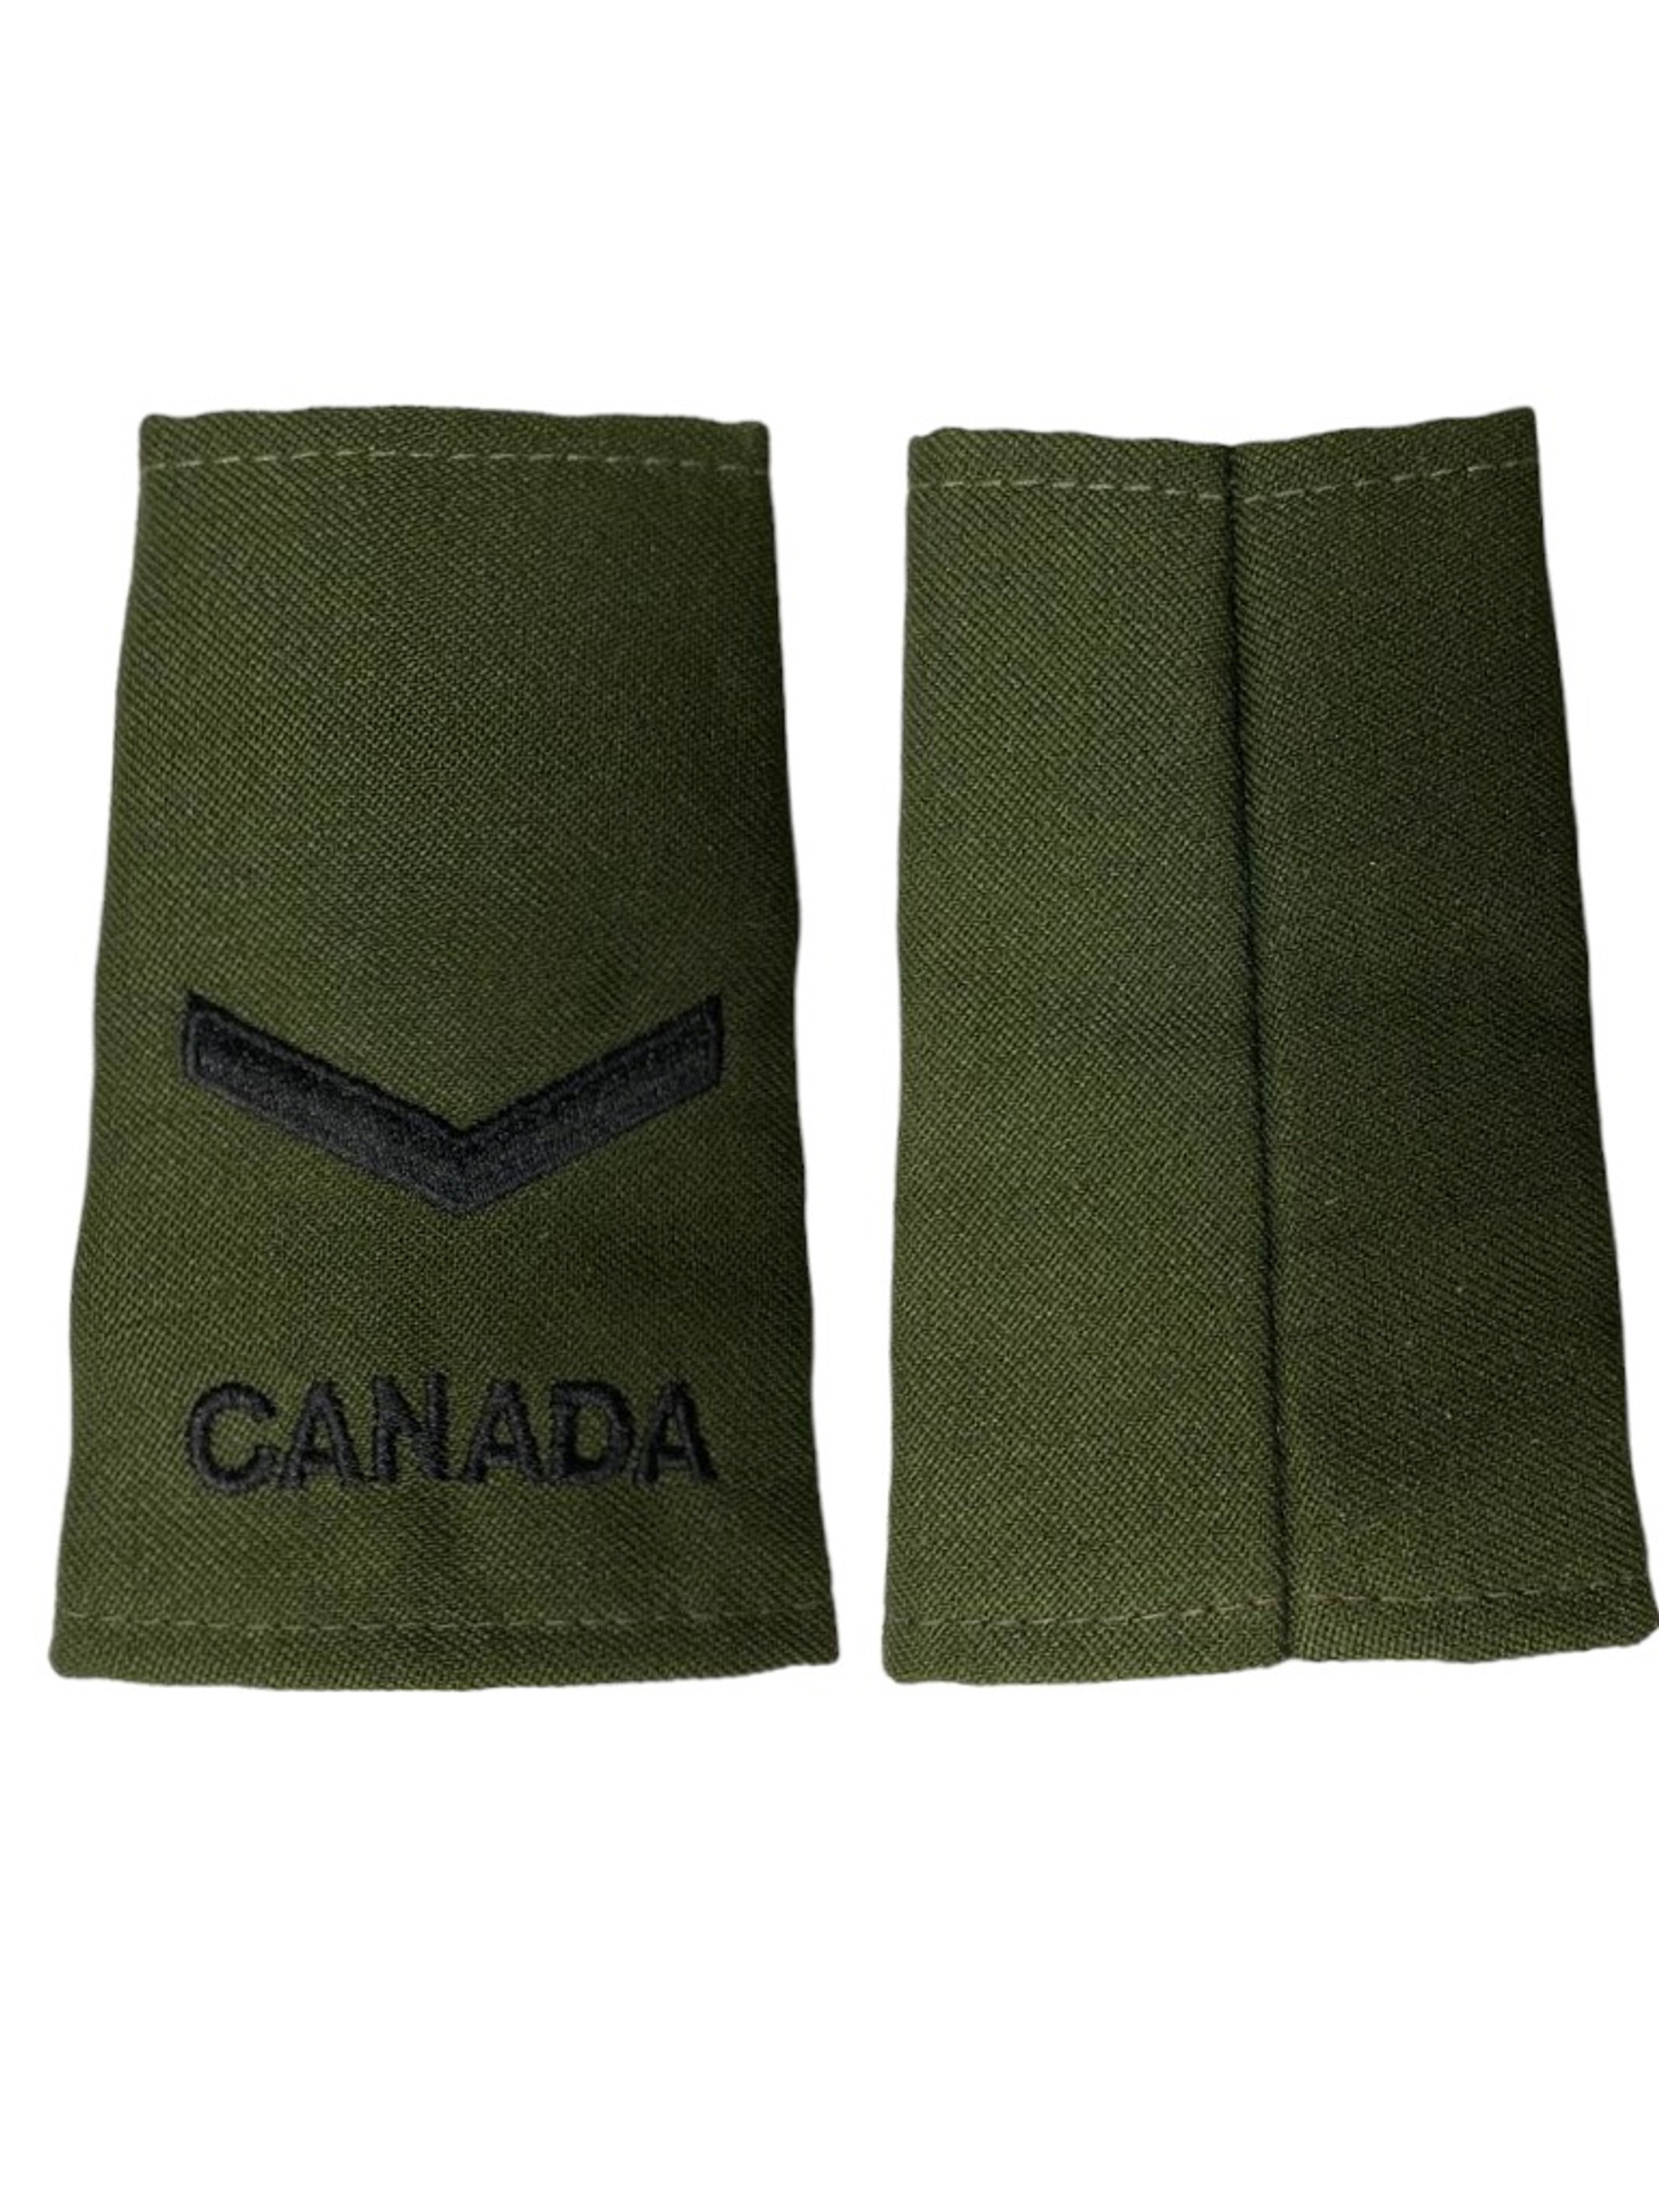 Canadian Armed Forces Green Rank Epaulets Navy - Able Seaman